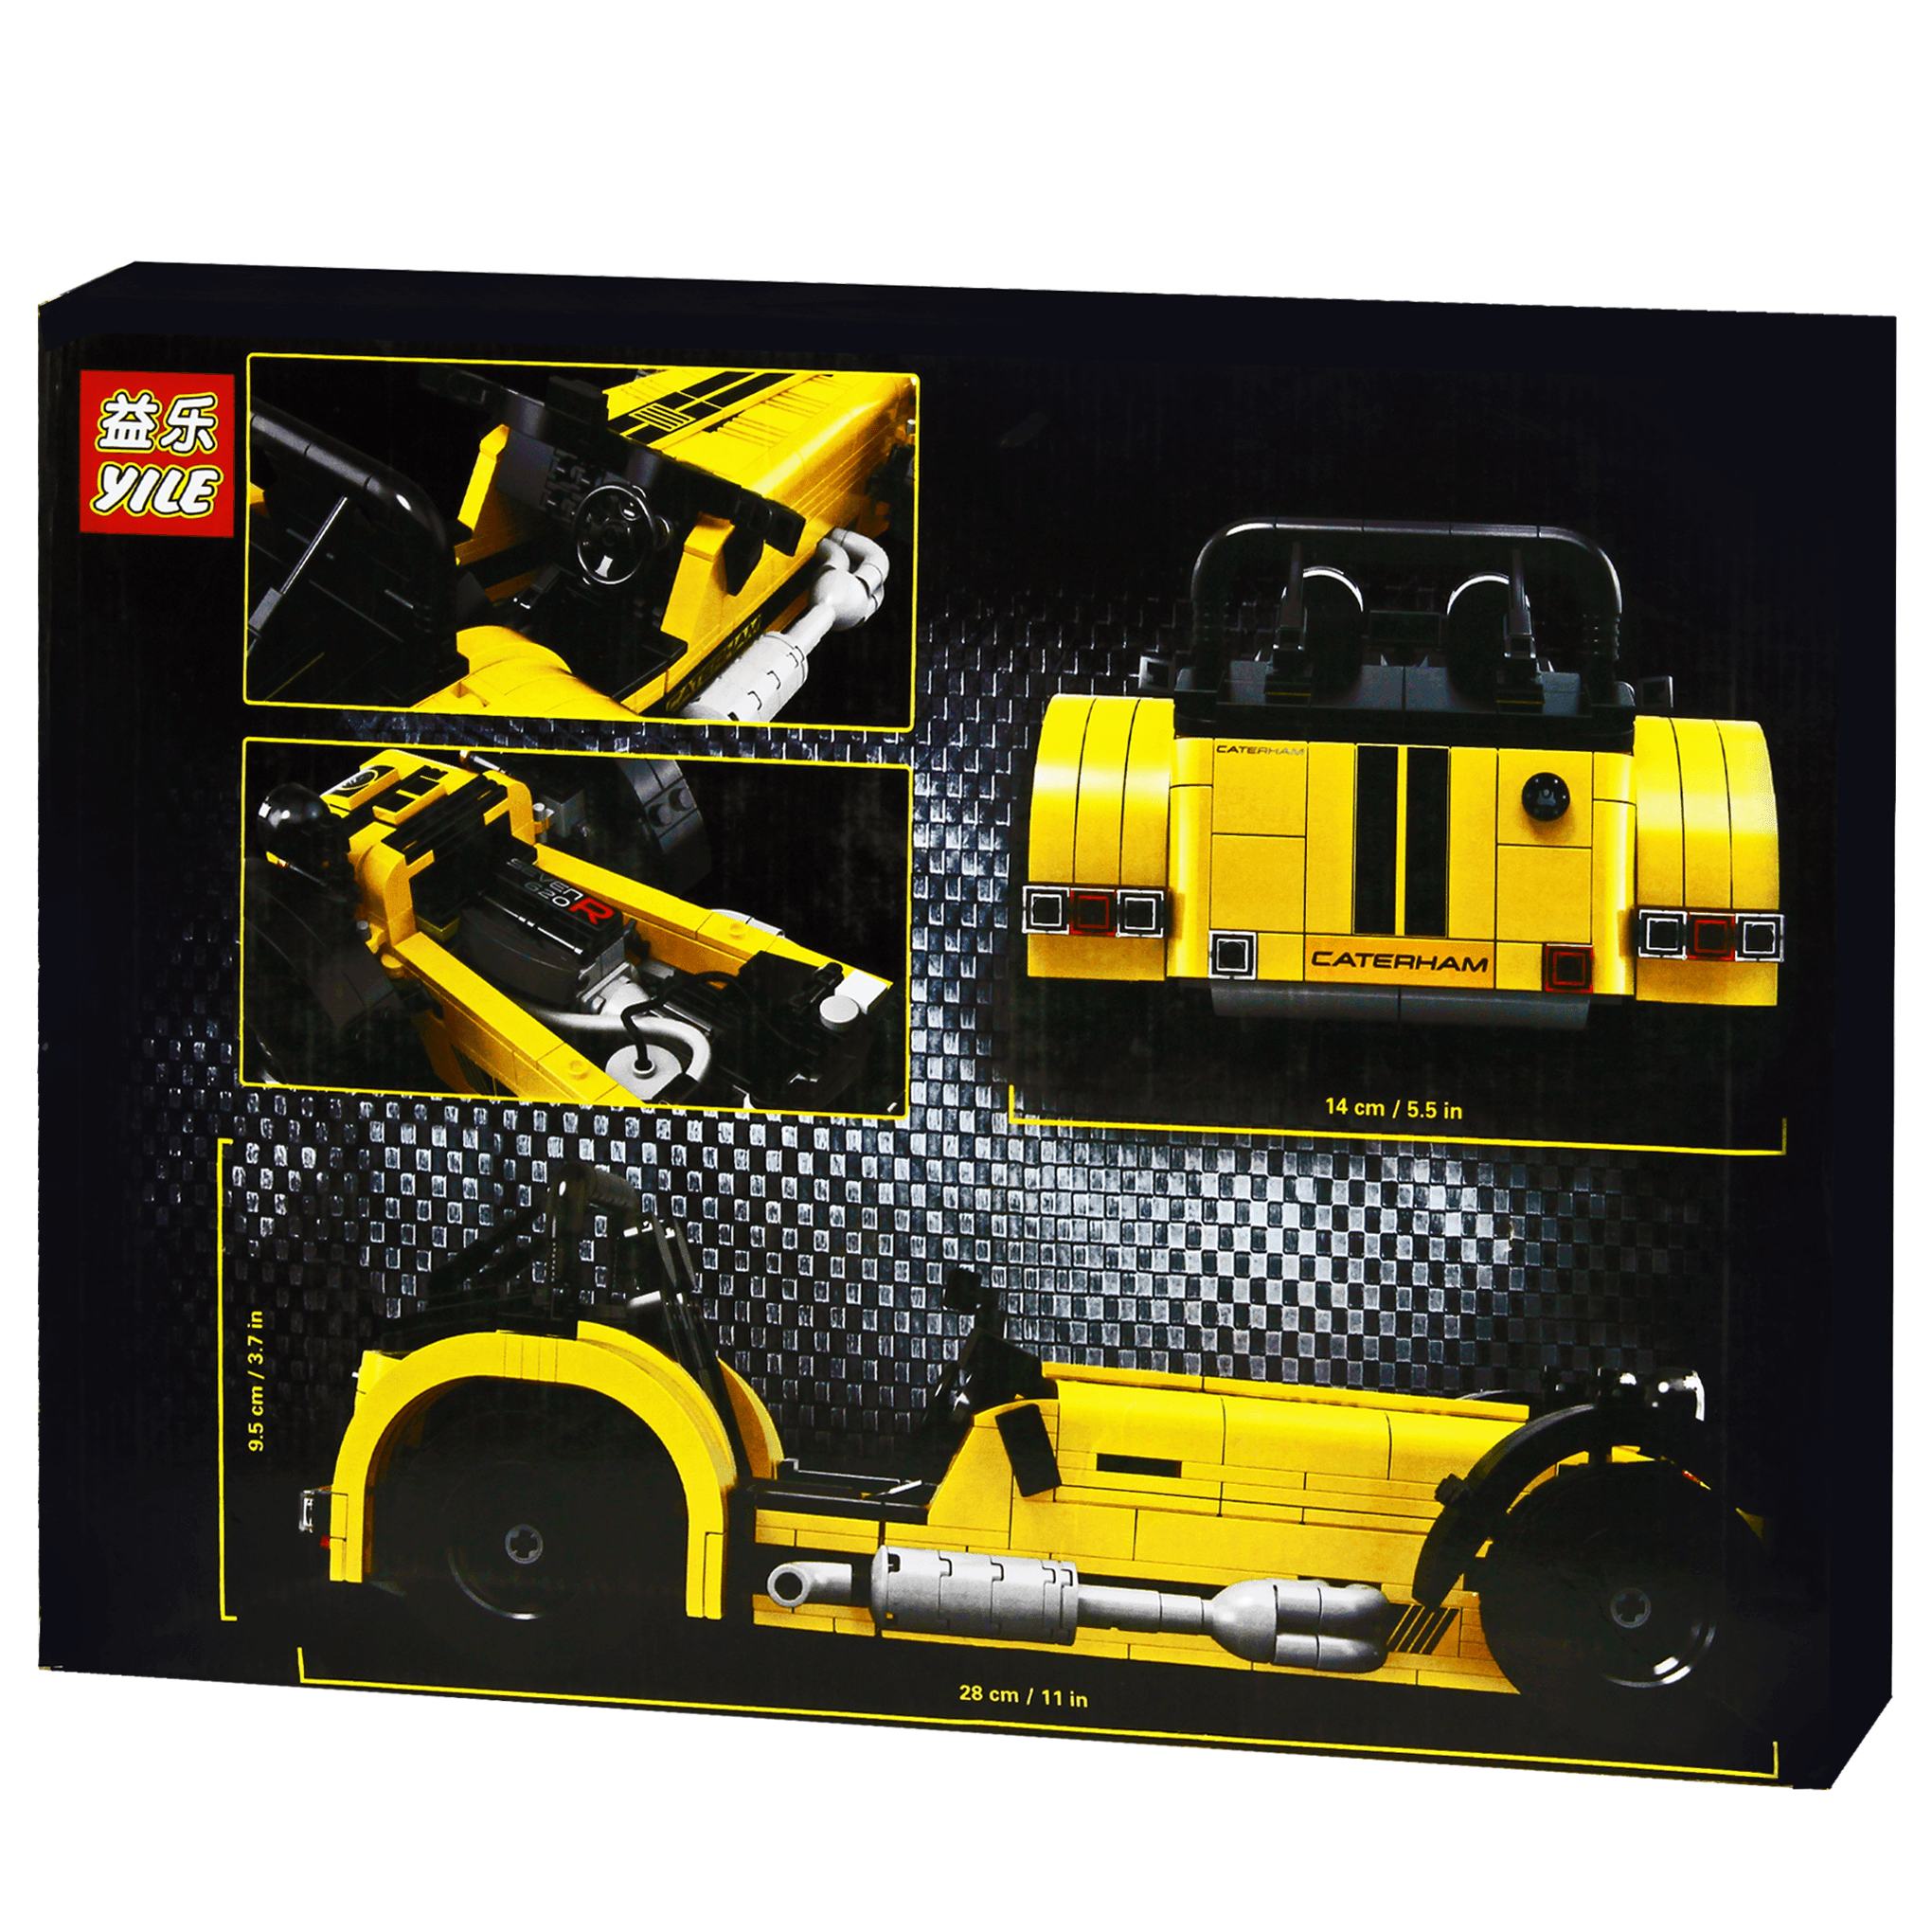 Yile Creator Caterham Seven 620R Sports Car Building Blocks Kit (771 Pcs) For age +14 - BumbleToys - 14 Years & Up, 18+, Boys, Building Sets & Blocks, Cars, Creator, LEGO, Toy Land